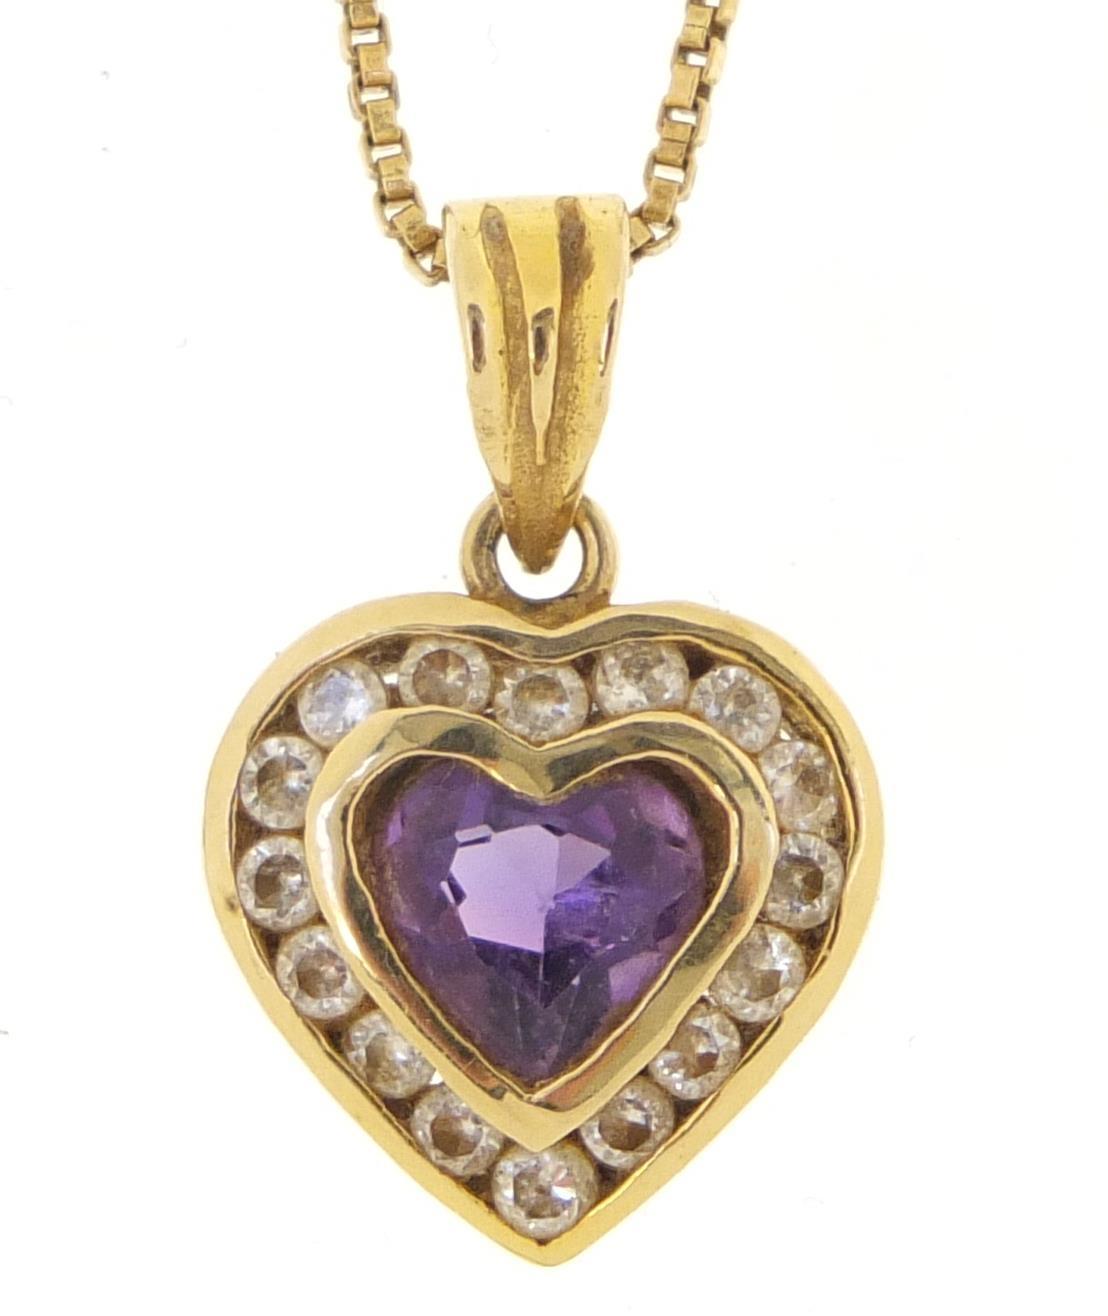 14ct gold amethyst and clear stone love heart pendant, 2cm in length on an unmarked gold coloured